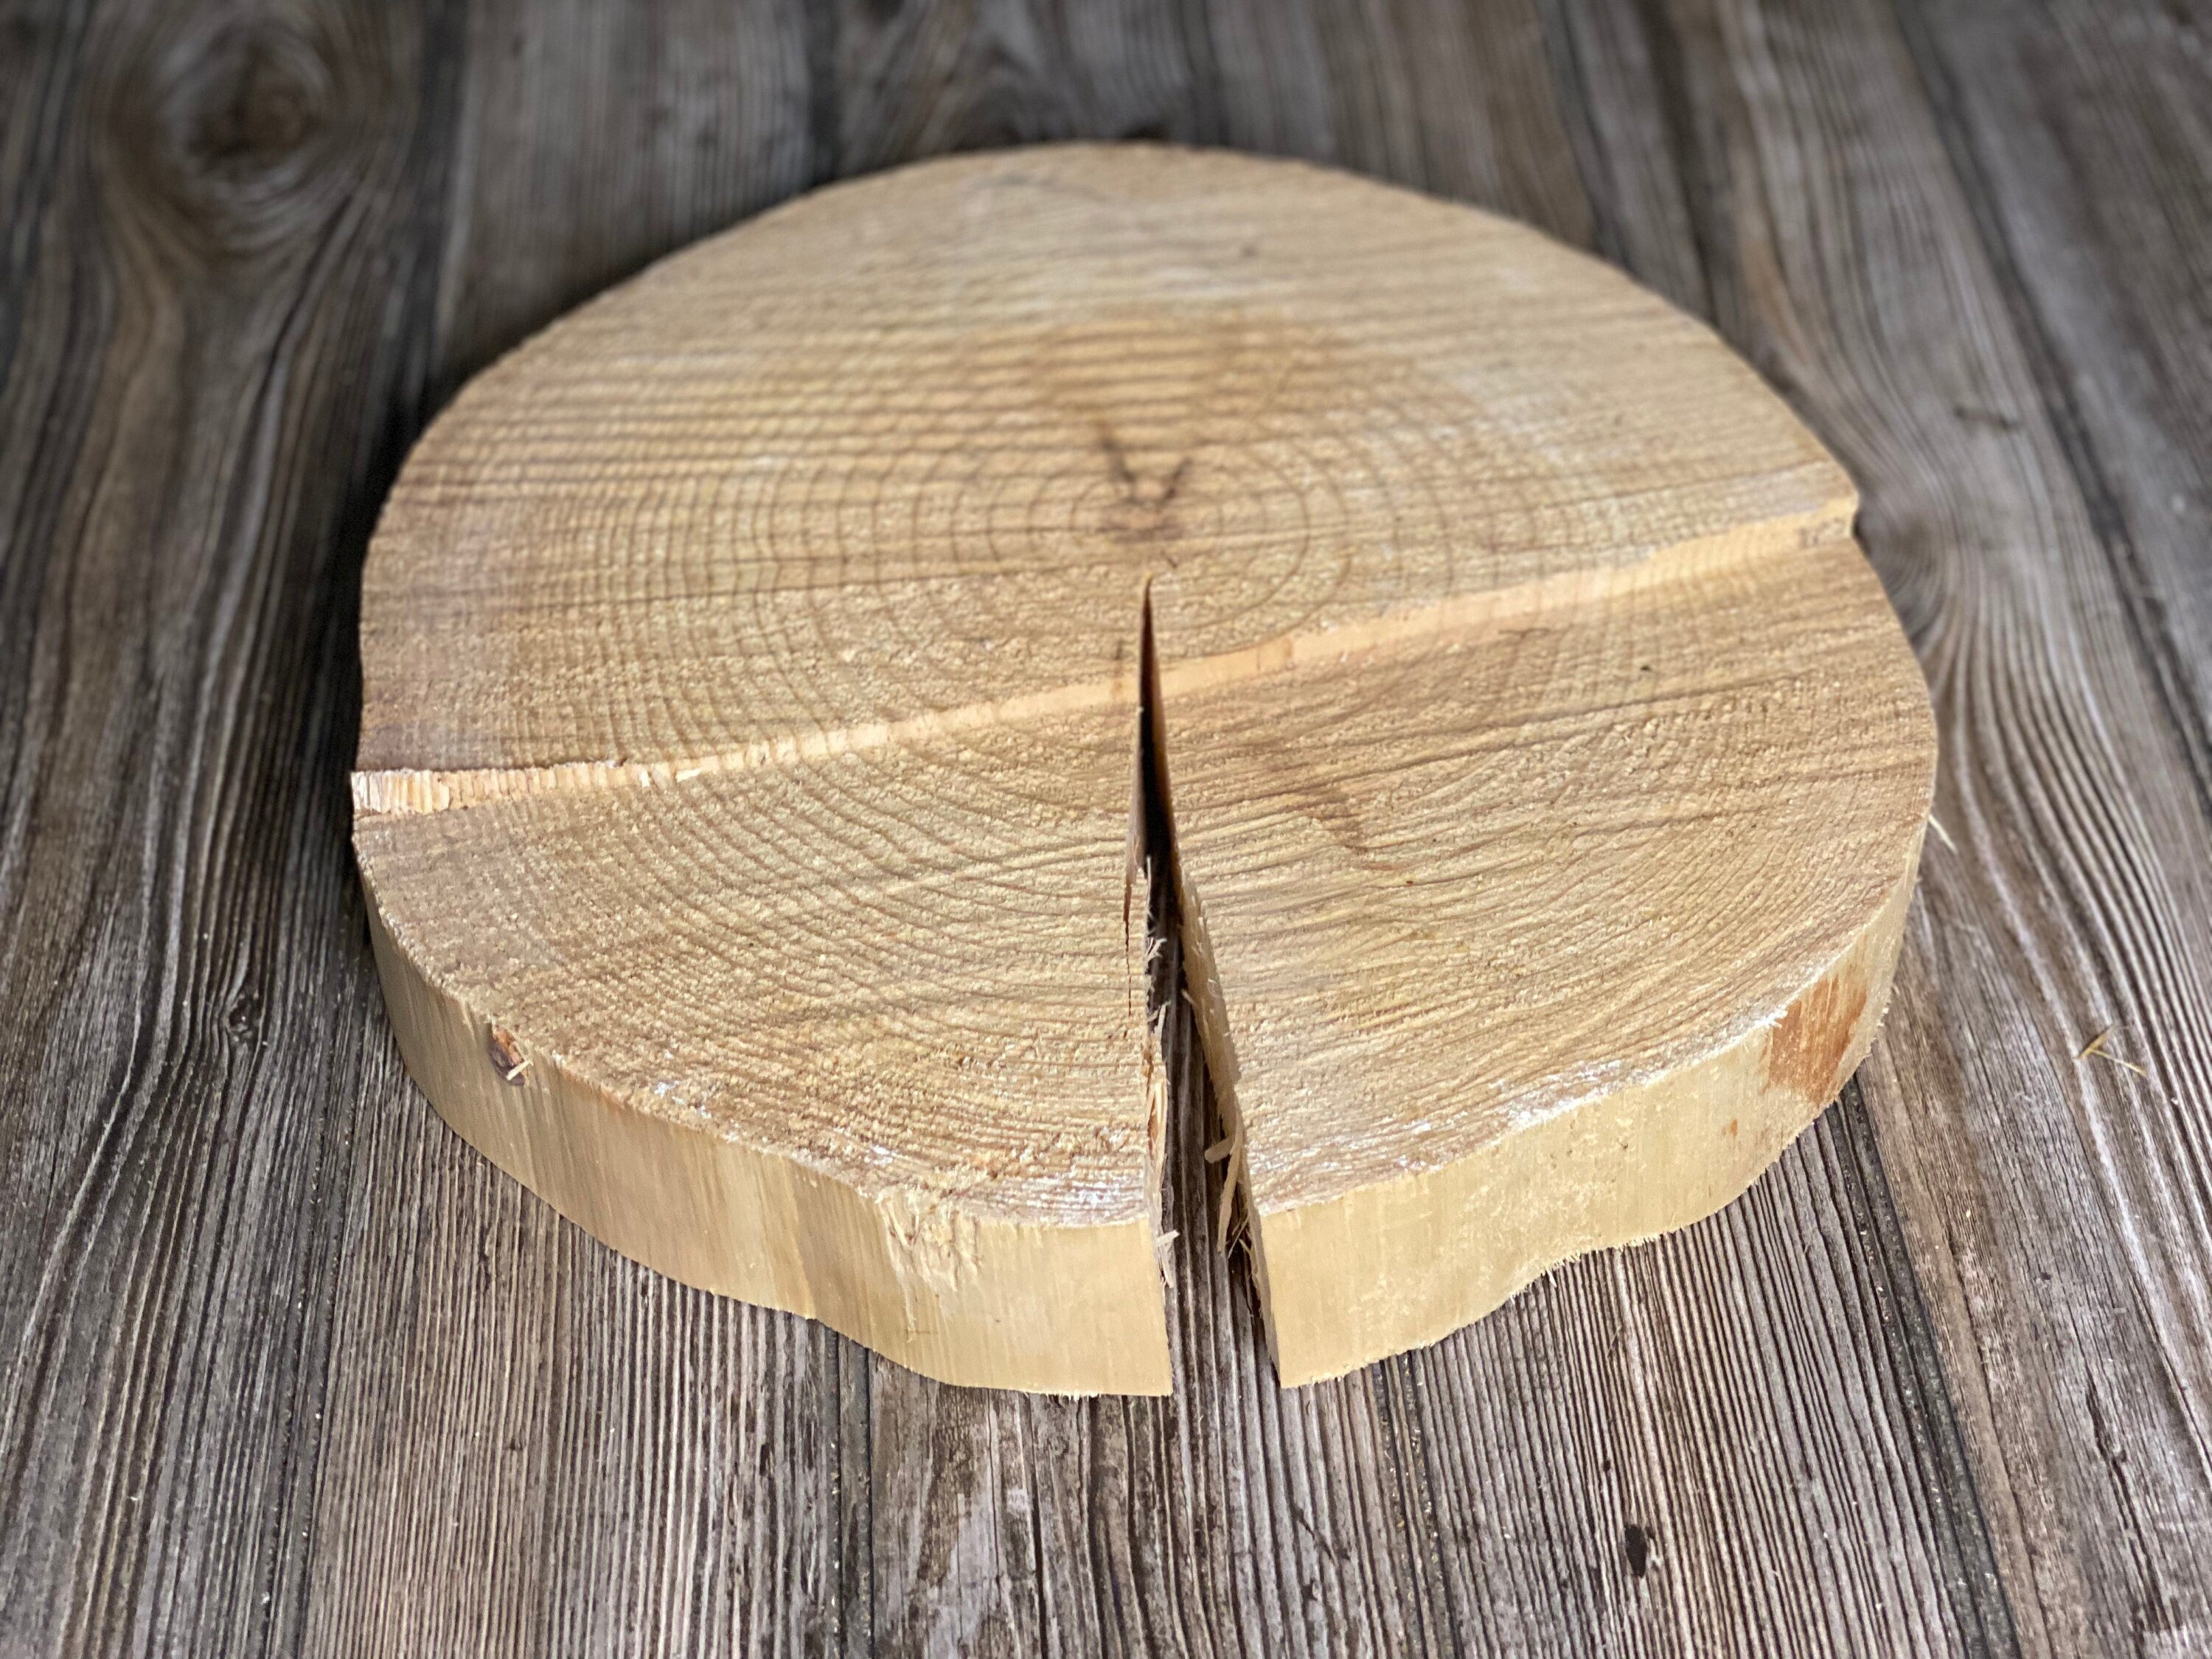 Pine Slice, Approximately 13 Inches Long by 13 Inches Wide and 2 Inches Tall